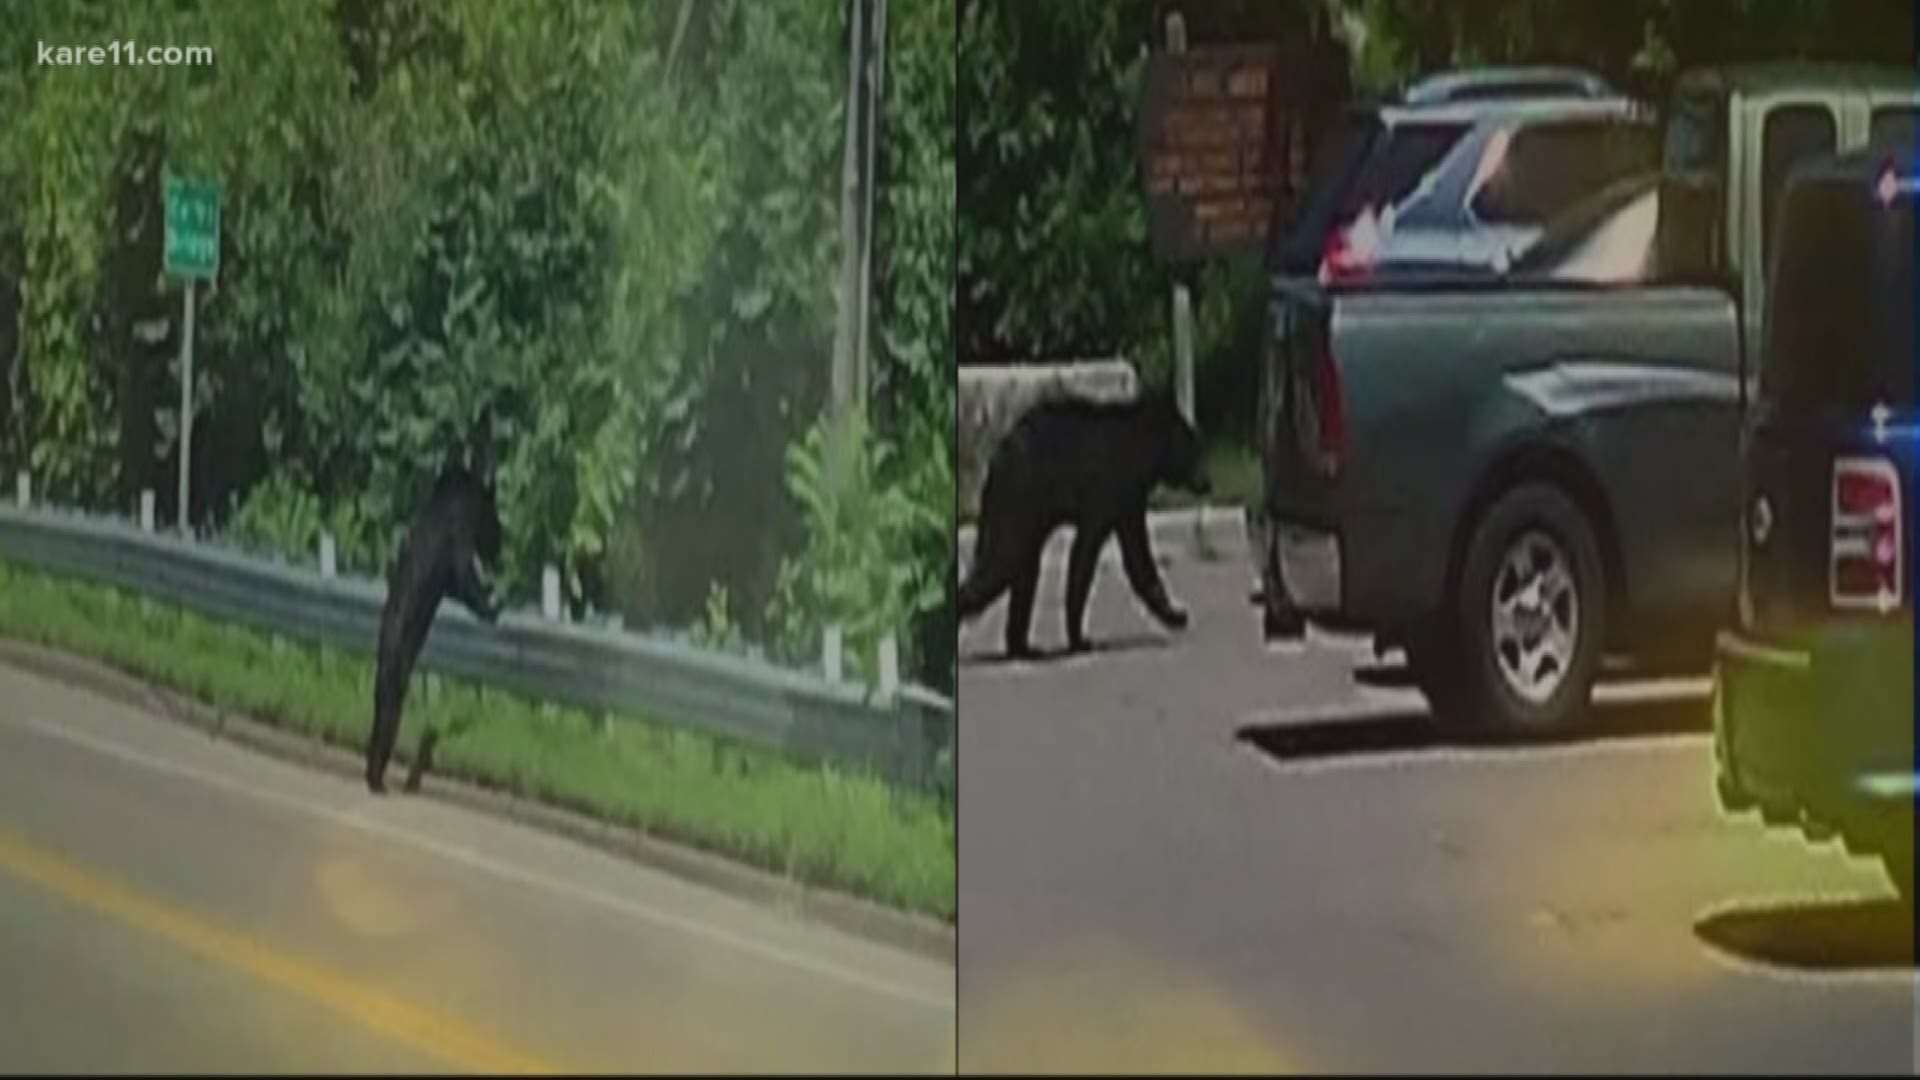 A 250-pound bear that wandered into a heavily populated area of Lake Minnetonka on Saturday afternoon was shot and killed. The DNR says it considered the bear a public safety threat. https://kare11.tv/2KEkHl7